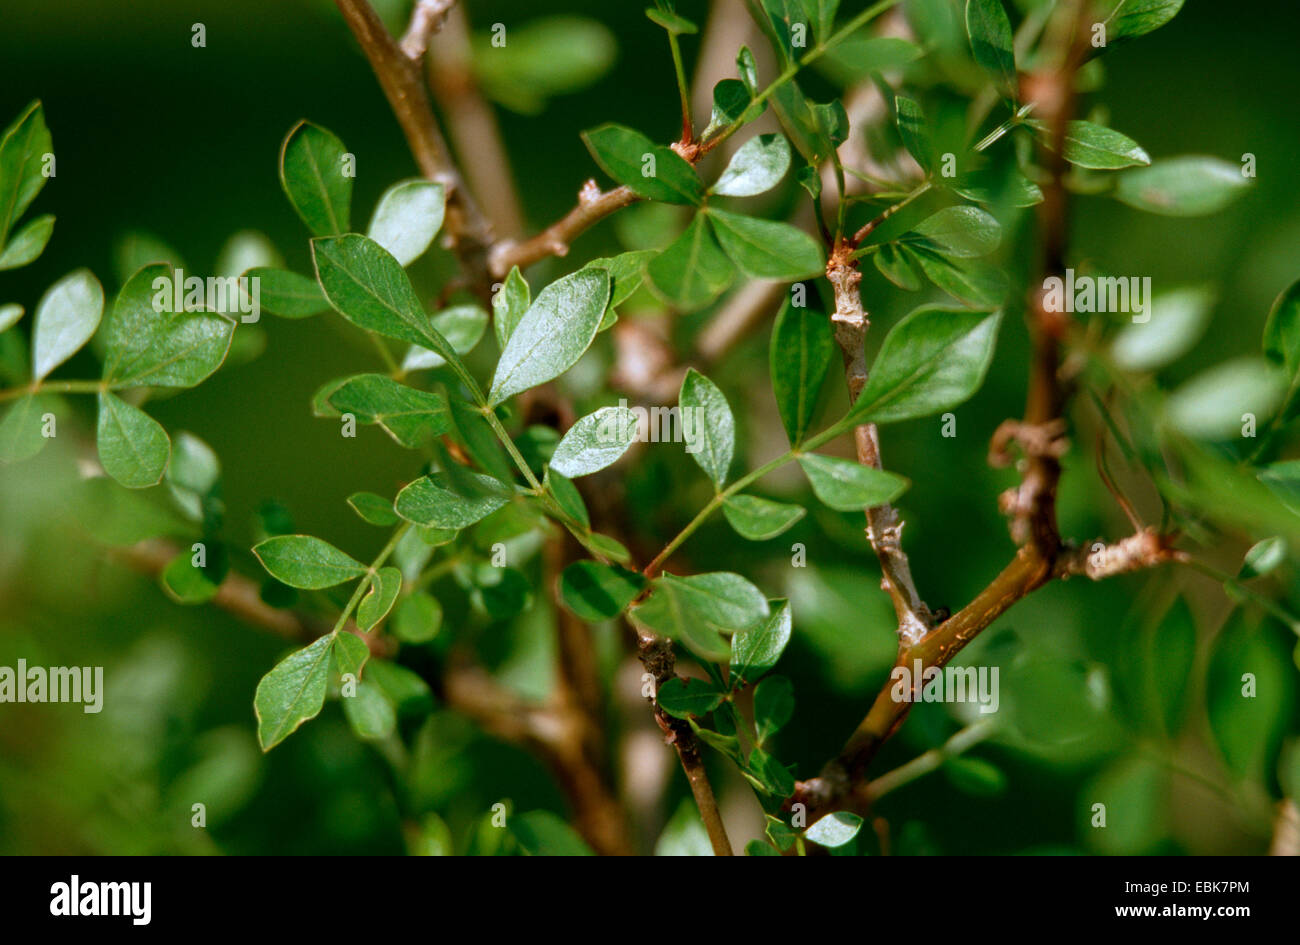 balsam of gilead (Commiphora abyssinica), leaves Stock Photo